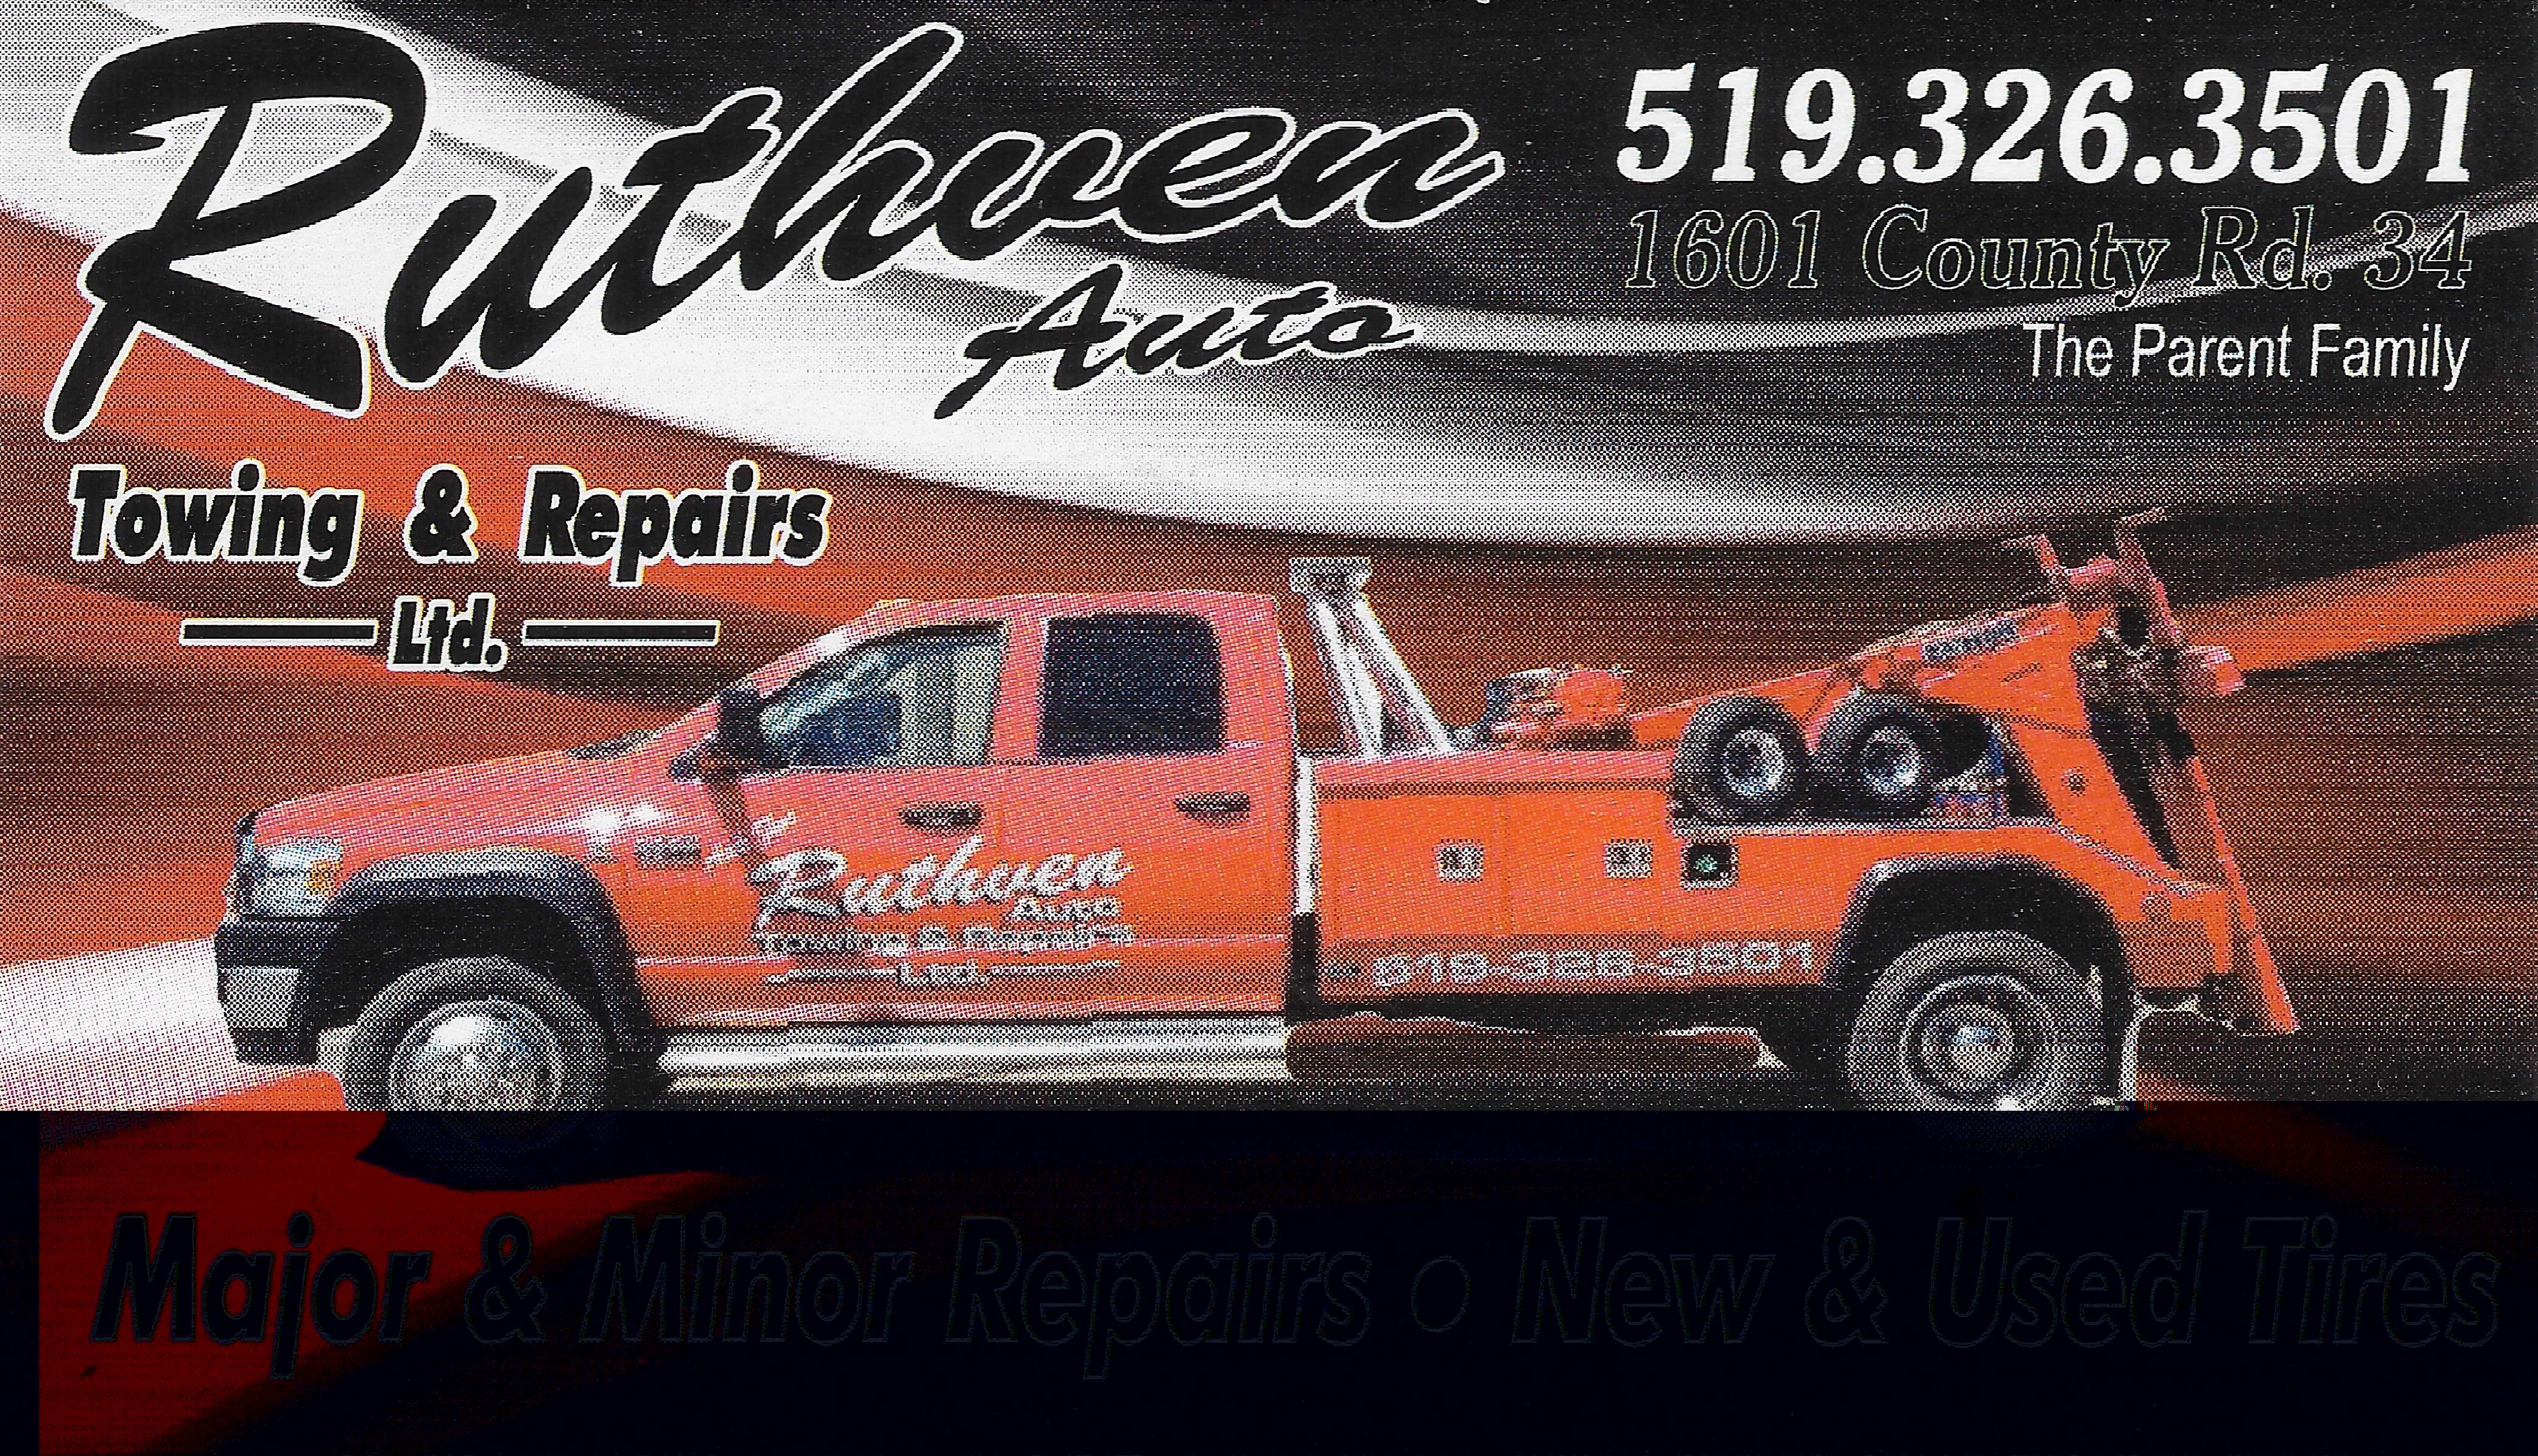 Ruthven Towing